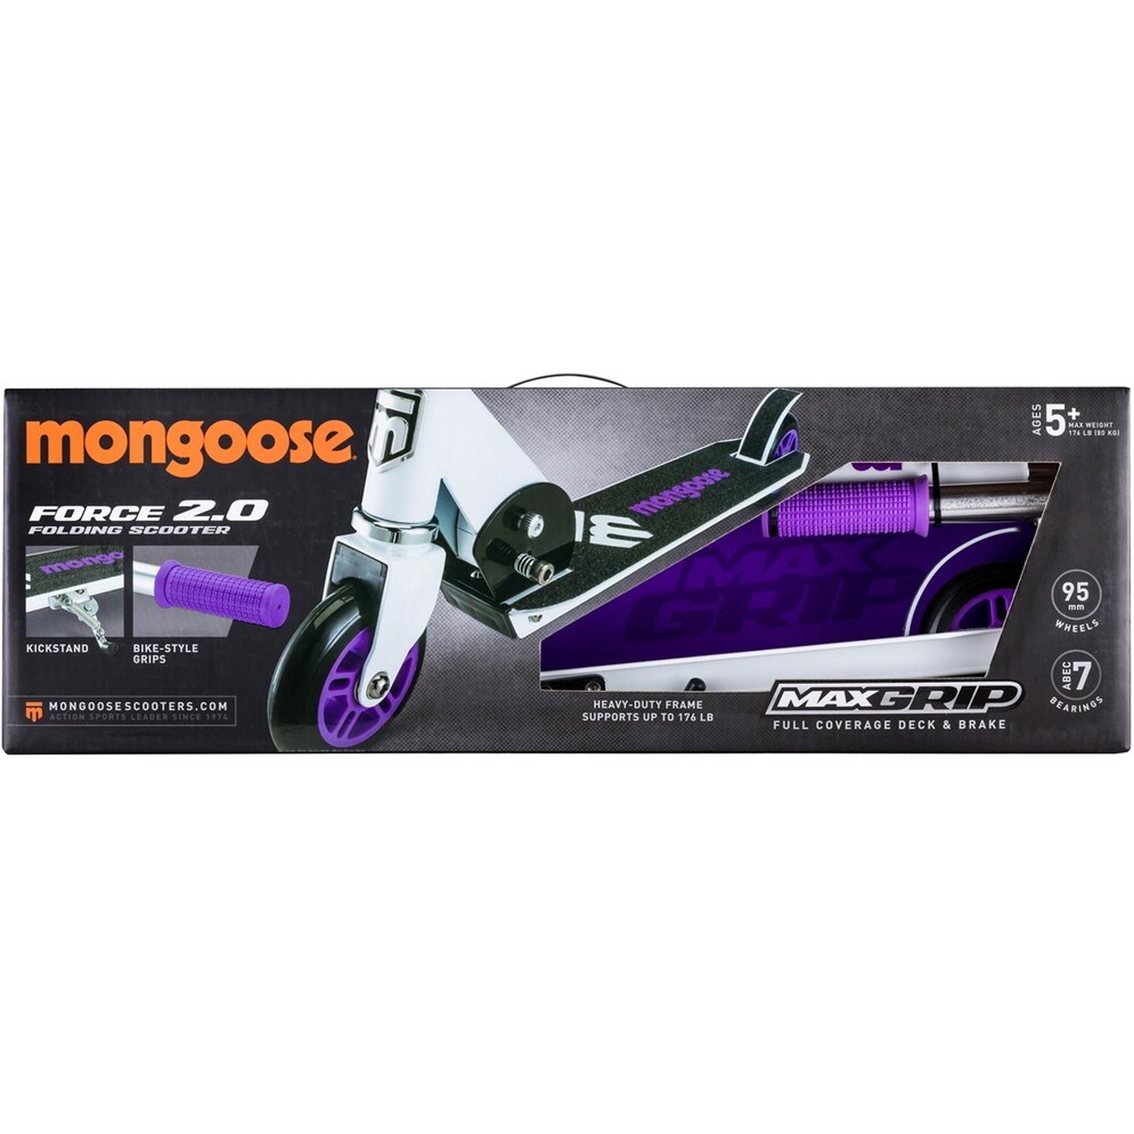 Mongoose Force 2.0 Folding Scooter - Image 2 of 9